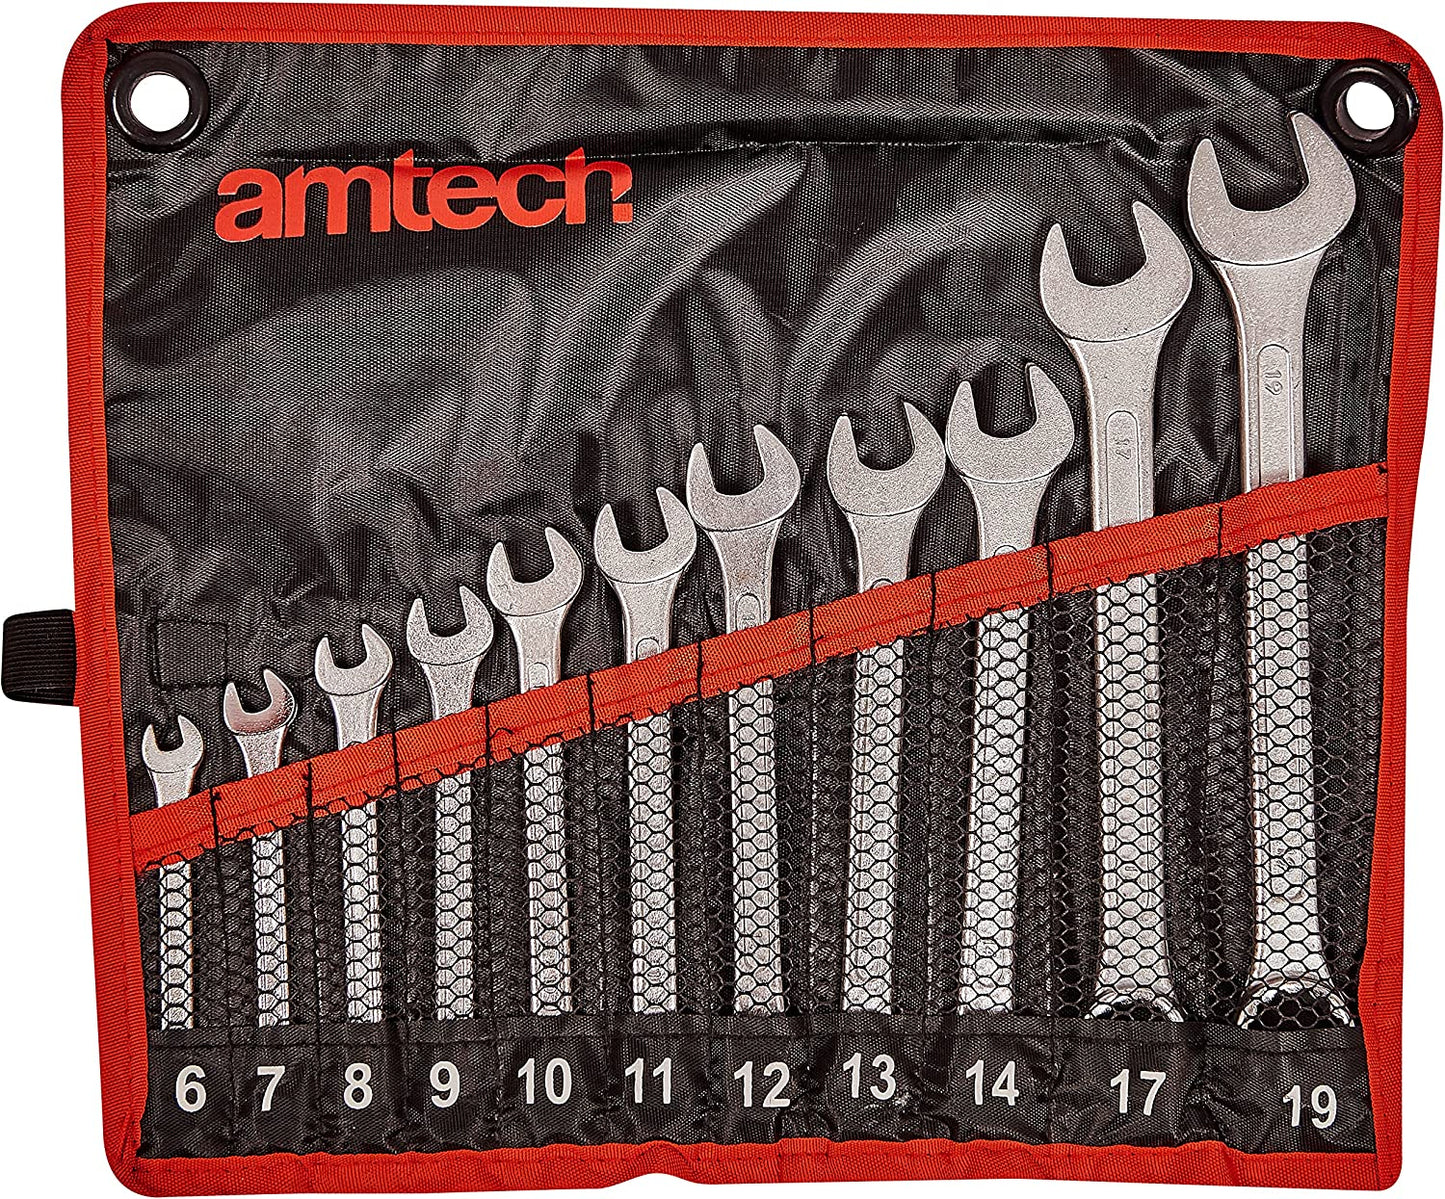 Amtech K0400 Combination Spanner Set, Drop Forged and Chrome Plated Spanners, 6mm to 19mm